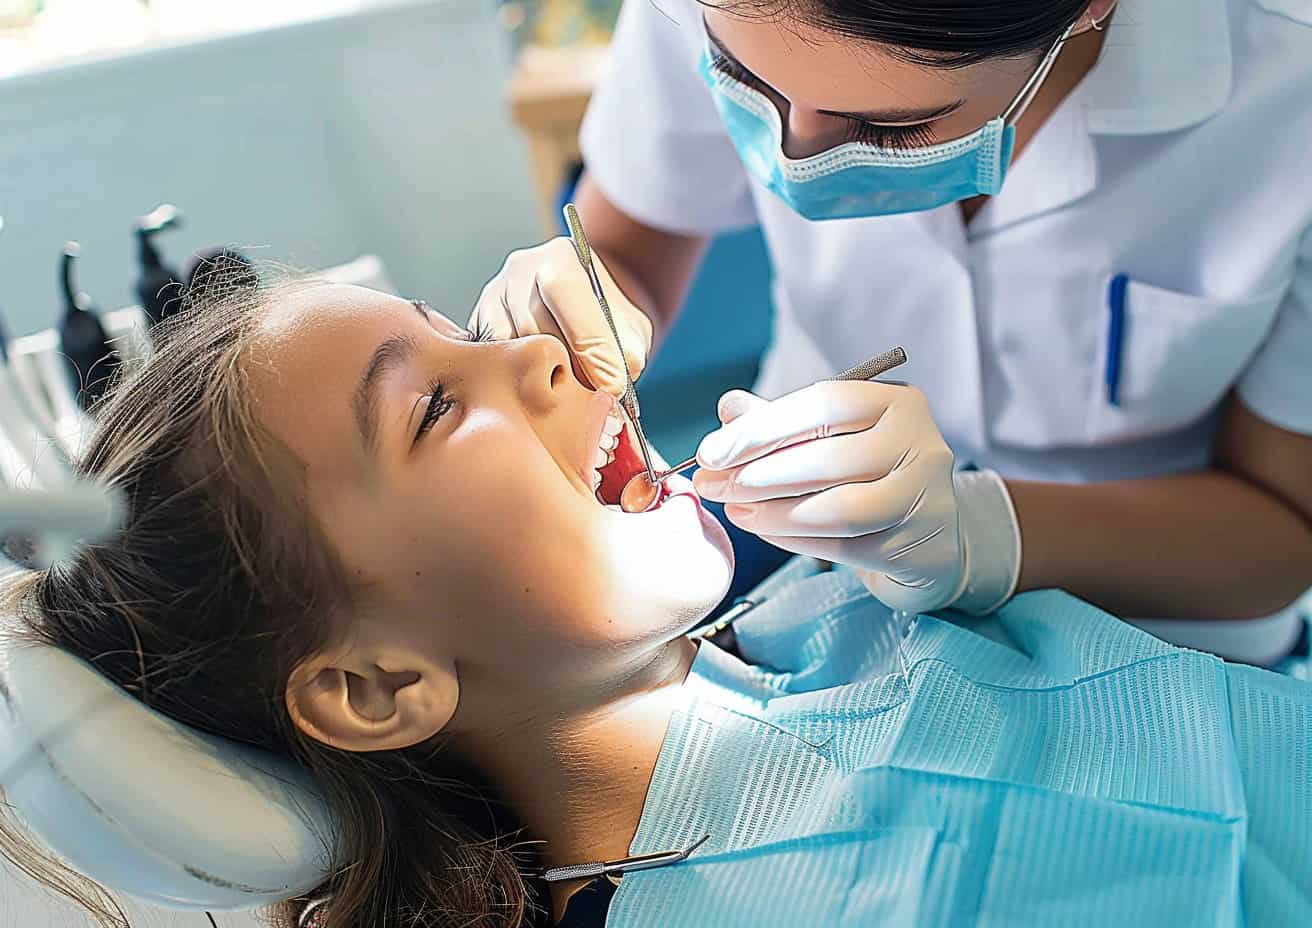 Pediatric Dentist Beaumont Launches New 'Tiny Teeth, Big Smiles' Campaign to Promote Early Childhood Dental Care